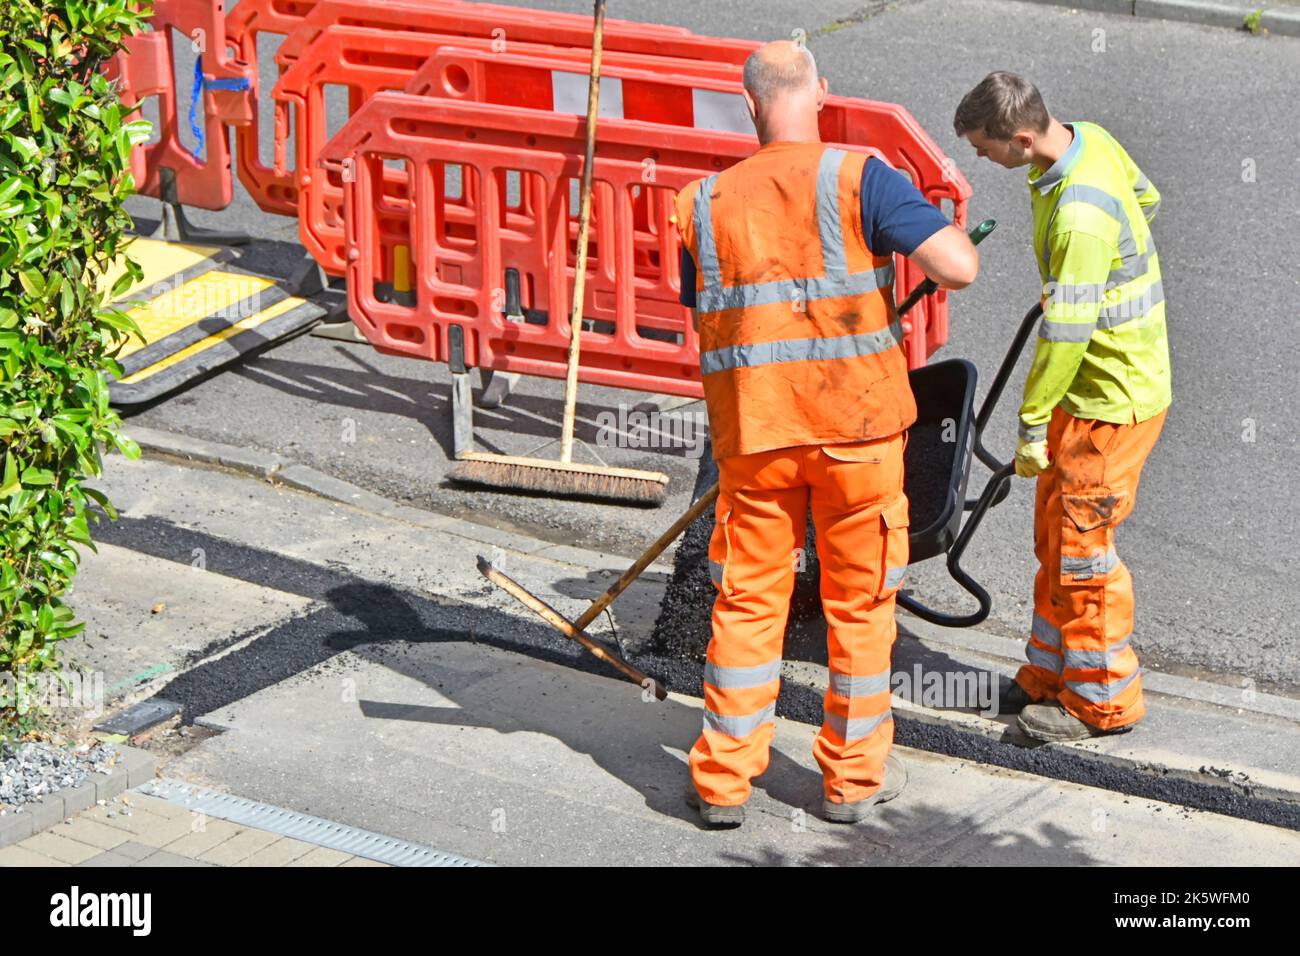 Workmen tip tarmac type paving material from wheelbarrow to reinstate narrow pavement trench after underground fibre optic broadband cable laying UK Stock Photo